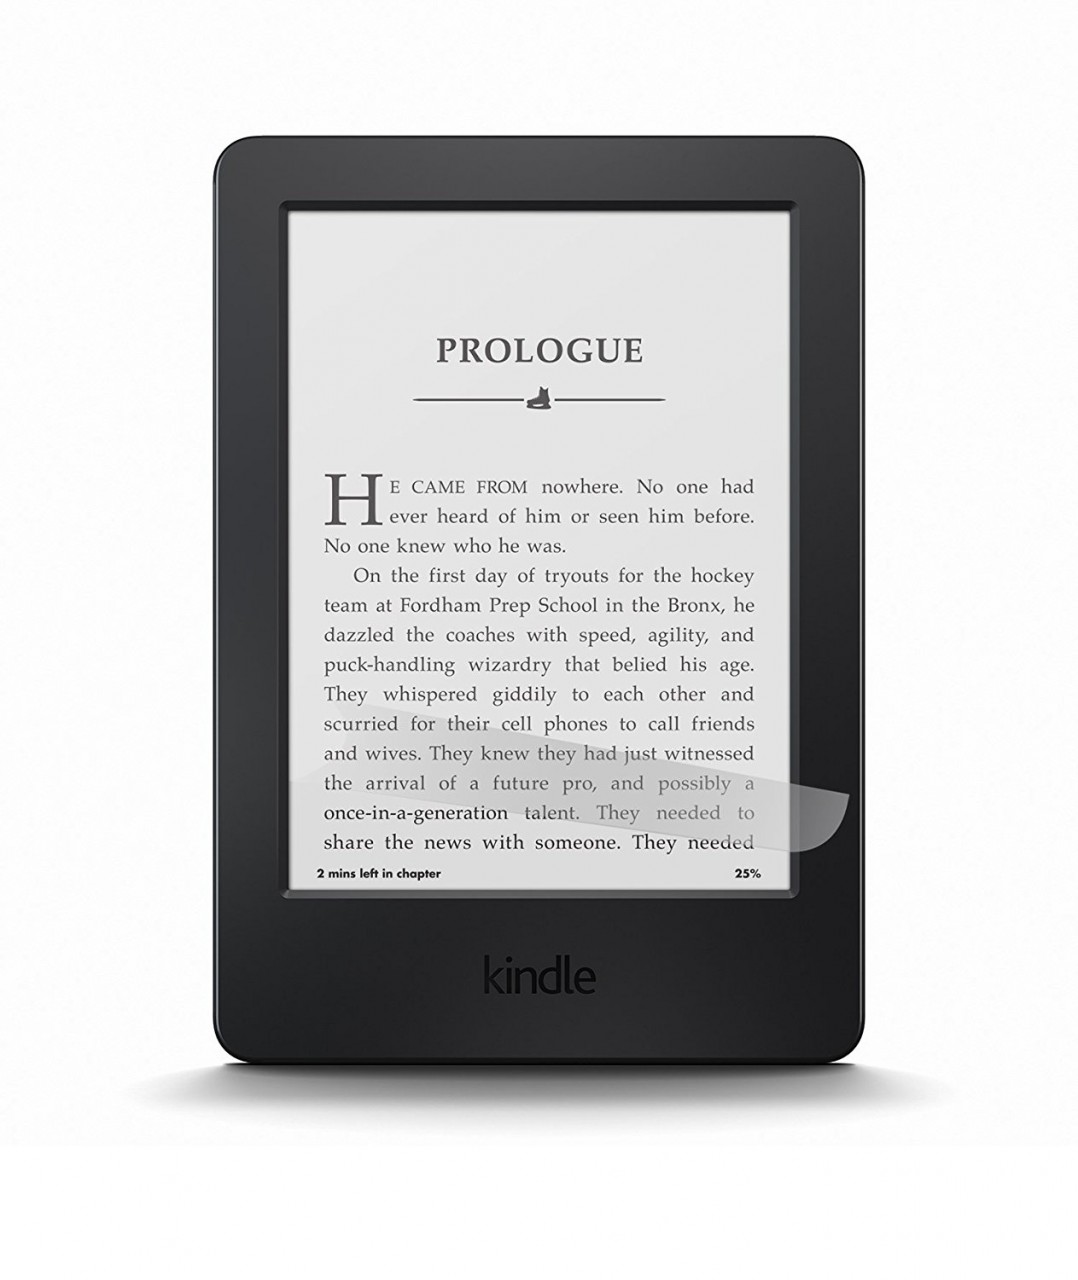 NuPro Anti-Glare Screen Protector for Kindle Paperwhite (Previous  Generation - 7th)